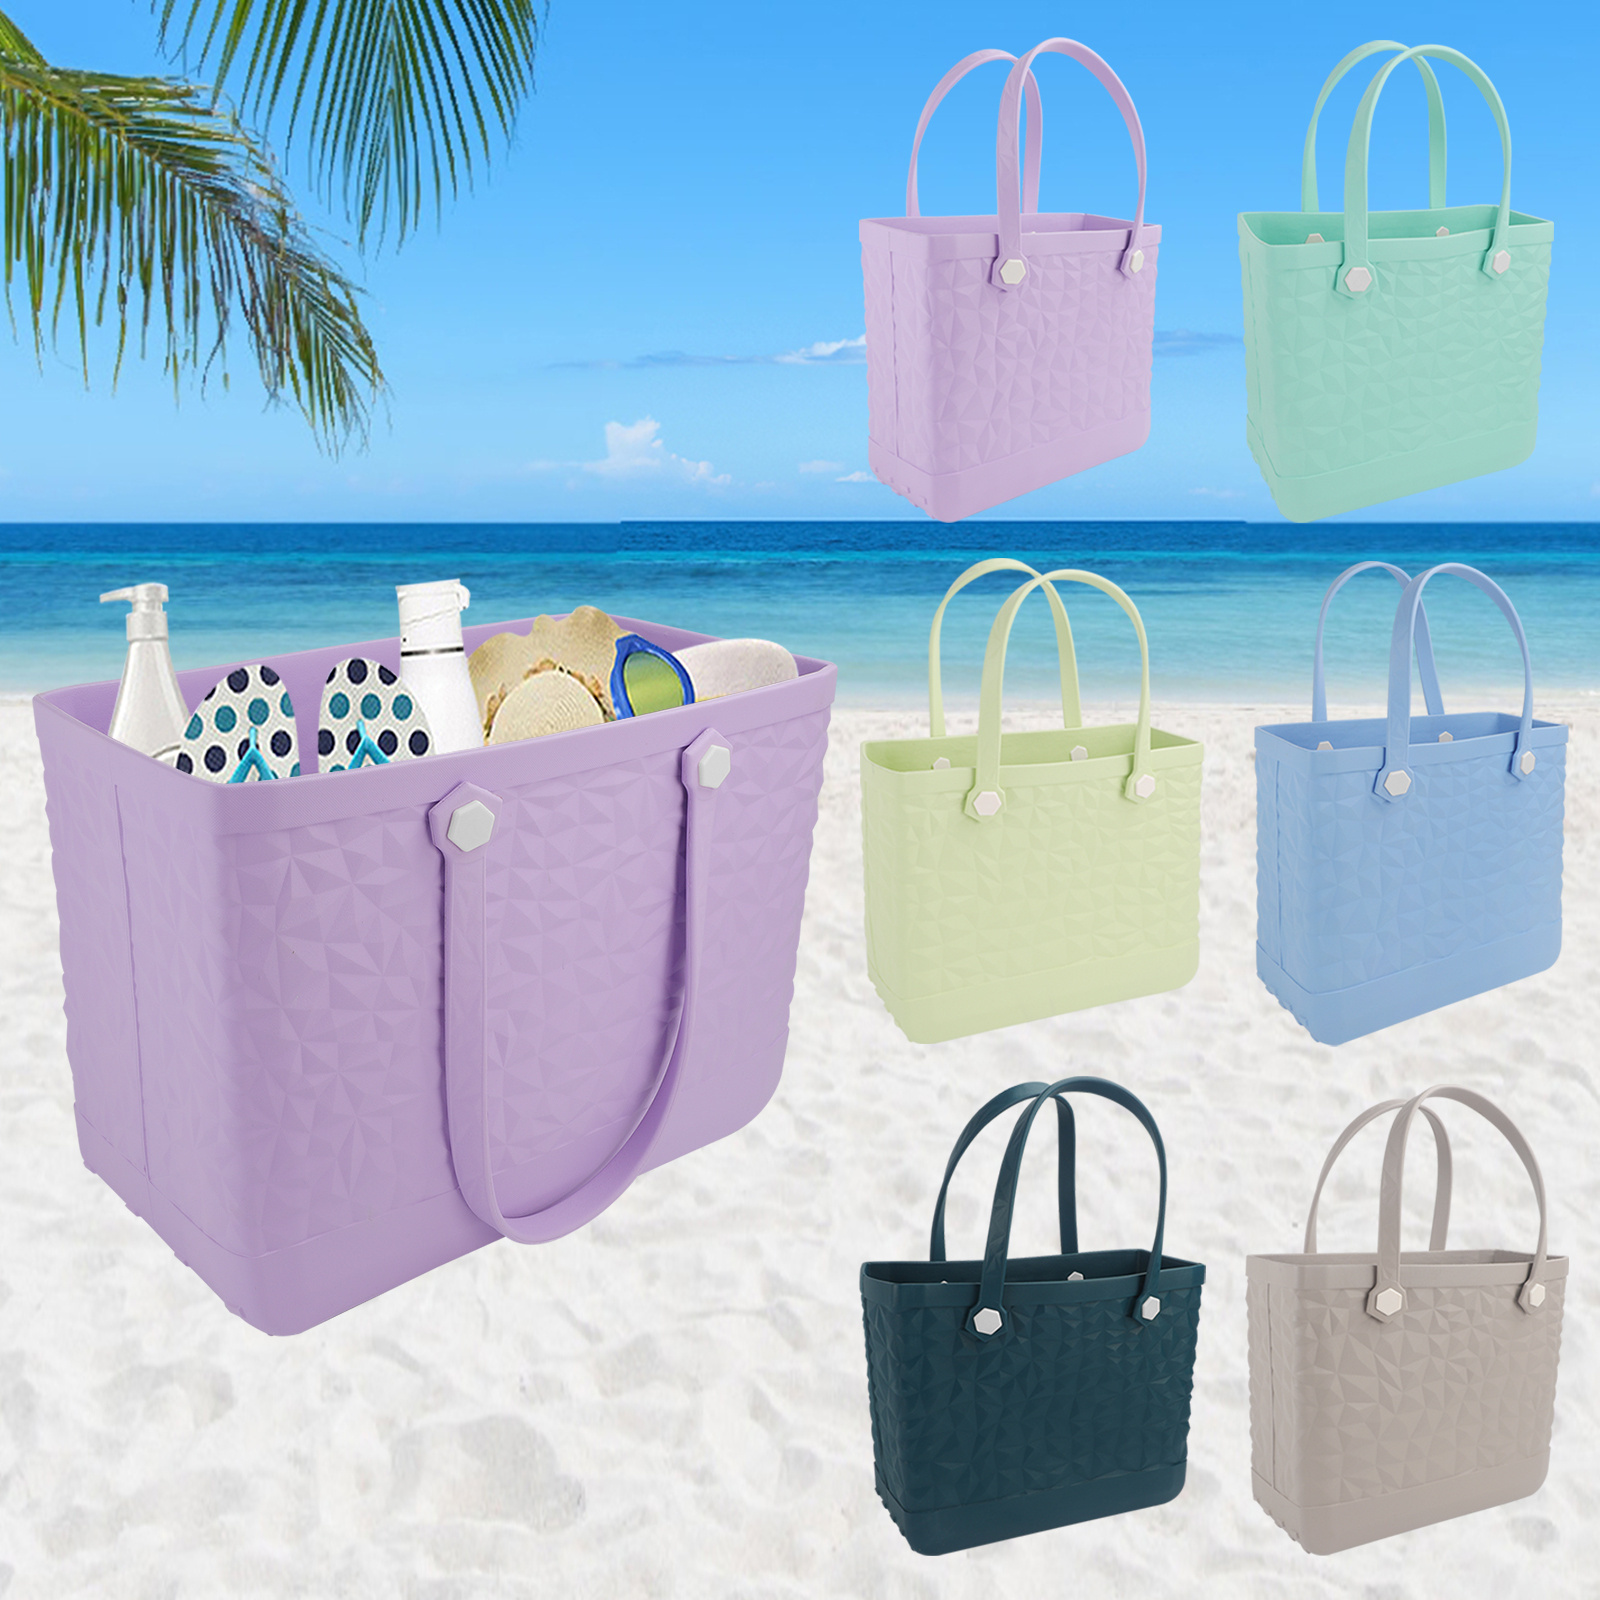 

Large Waterproof Eva Beach Tote Bag - 18.1x13.4x8.6 Inches, Portable Handbag With Large Capacity For Beach Travel, Swimming Pool, Outdoor Sports